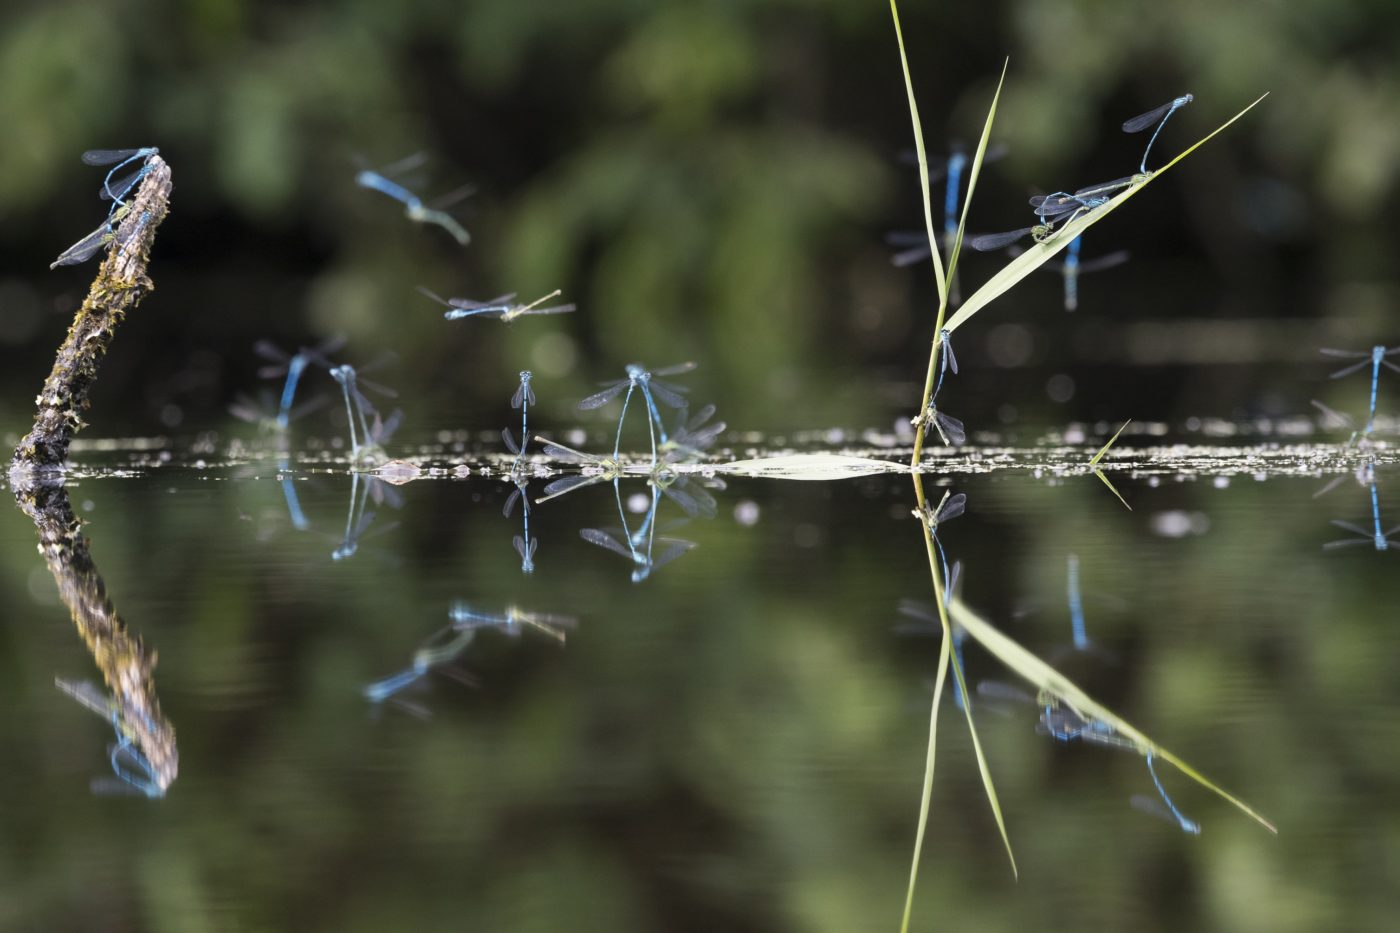 Common Blue/Azure Damselflies reflected on a pond surface